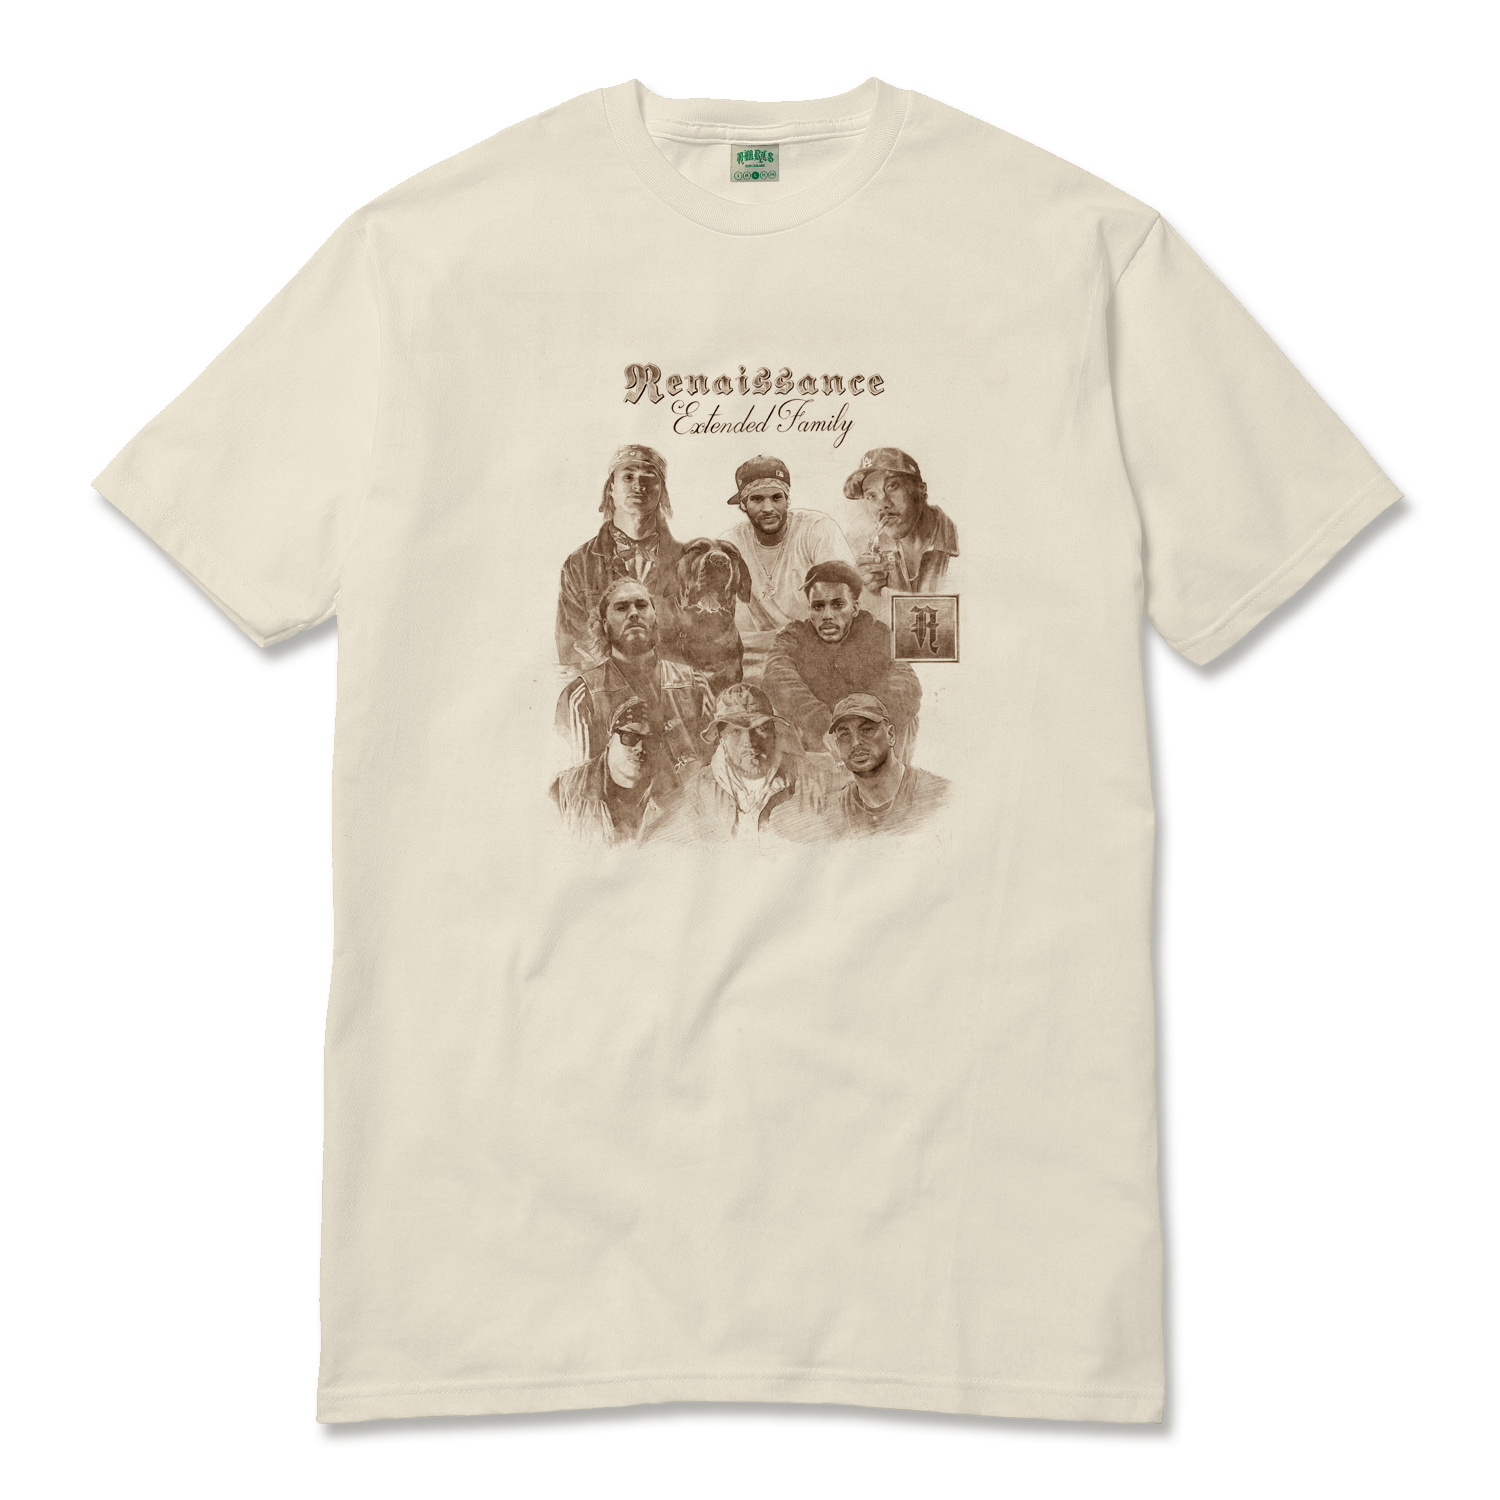 "RENAISSANCE: EXTENDED FAMILY" TEE (CREAM & BROWN)